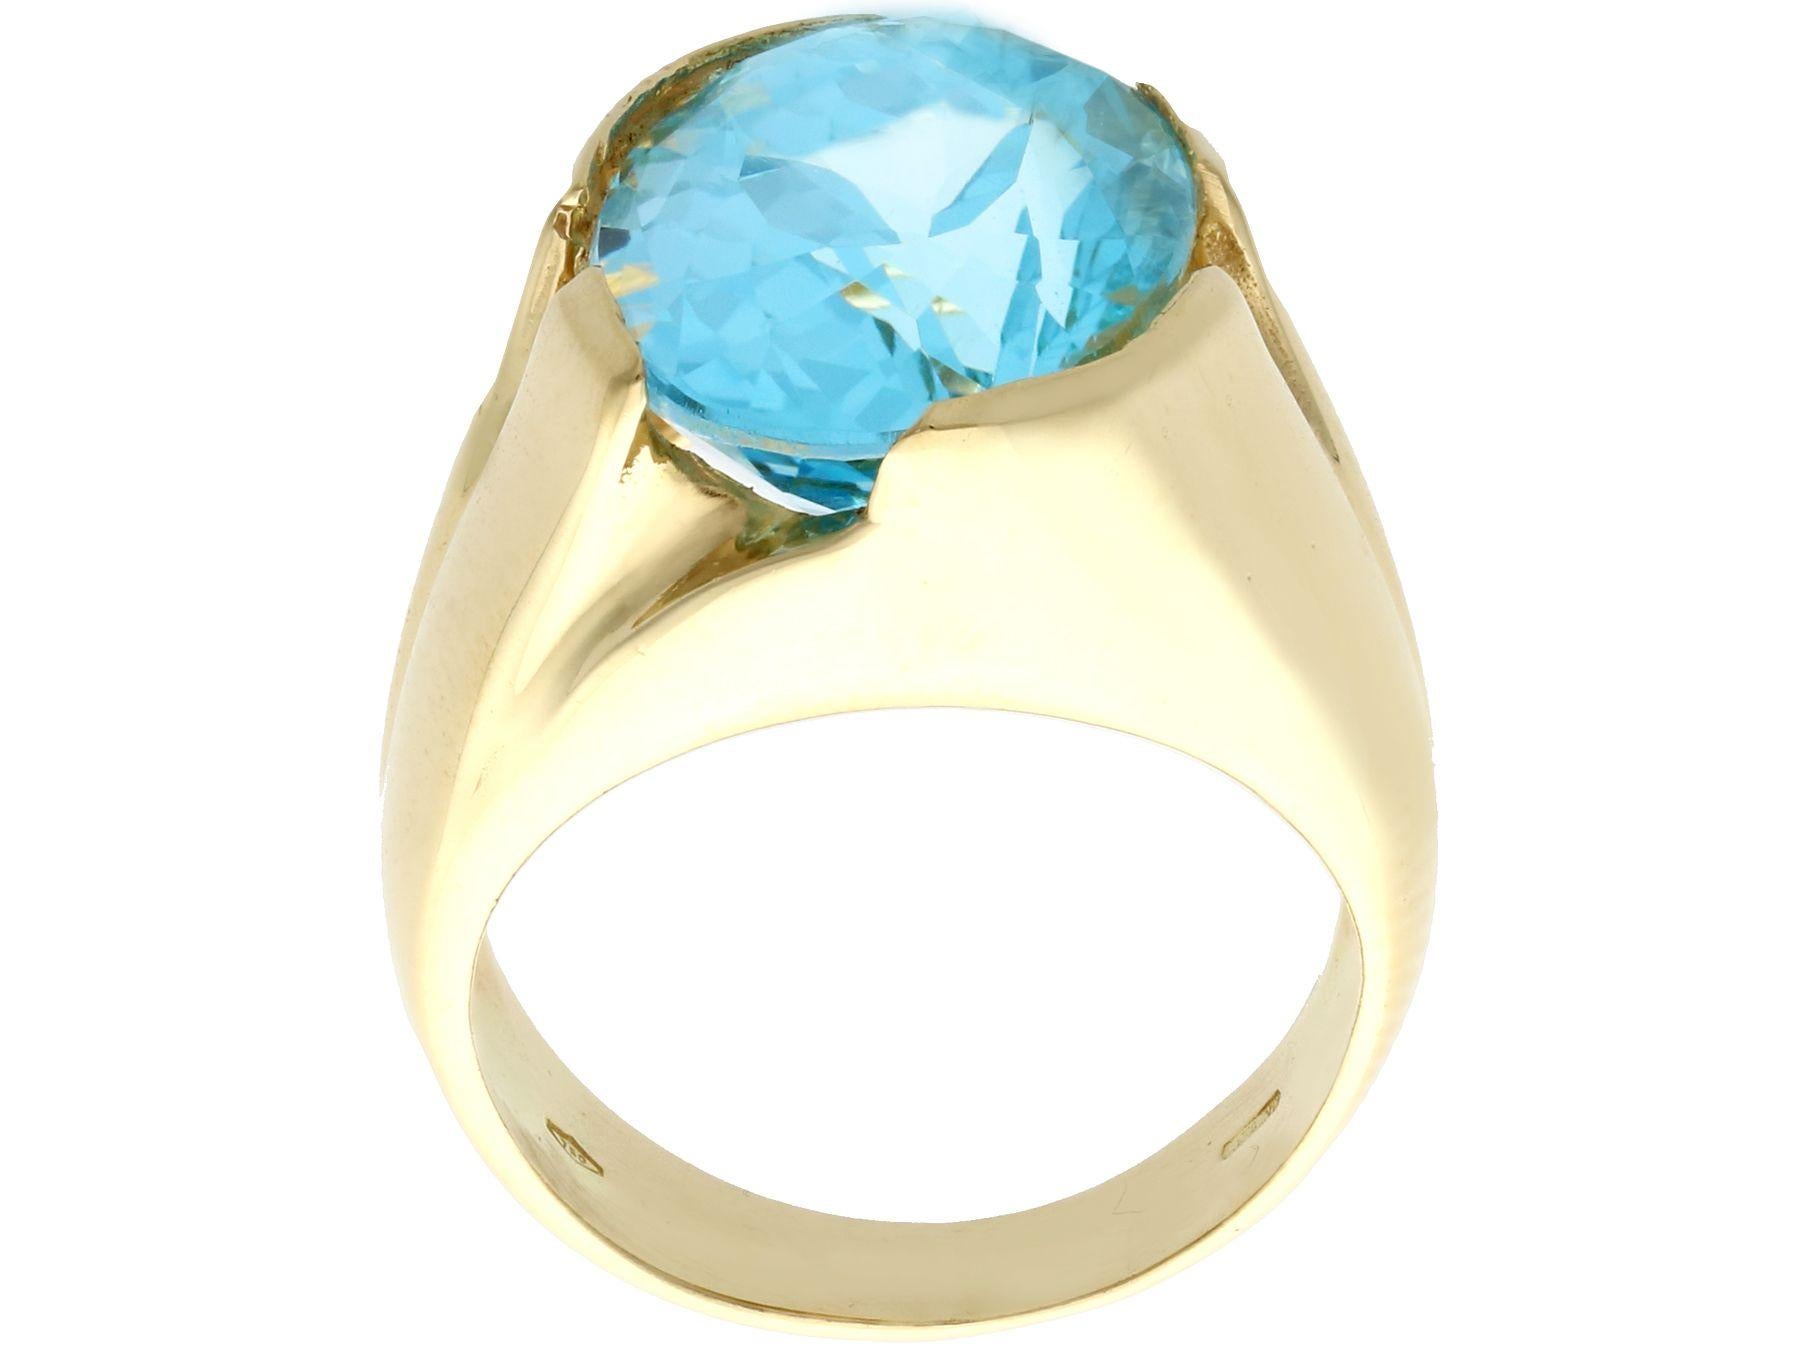 A stunning, fine and impressive vintage 14.12 carat blue topaz, 18k yellow gold cocktail ring; part of our diverse gemstone jewelry collection.

This stunning large blue oval cut topaz dress ring has been crafted in 18k  yellow gold.

The feature